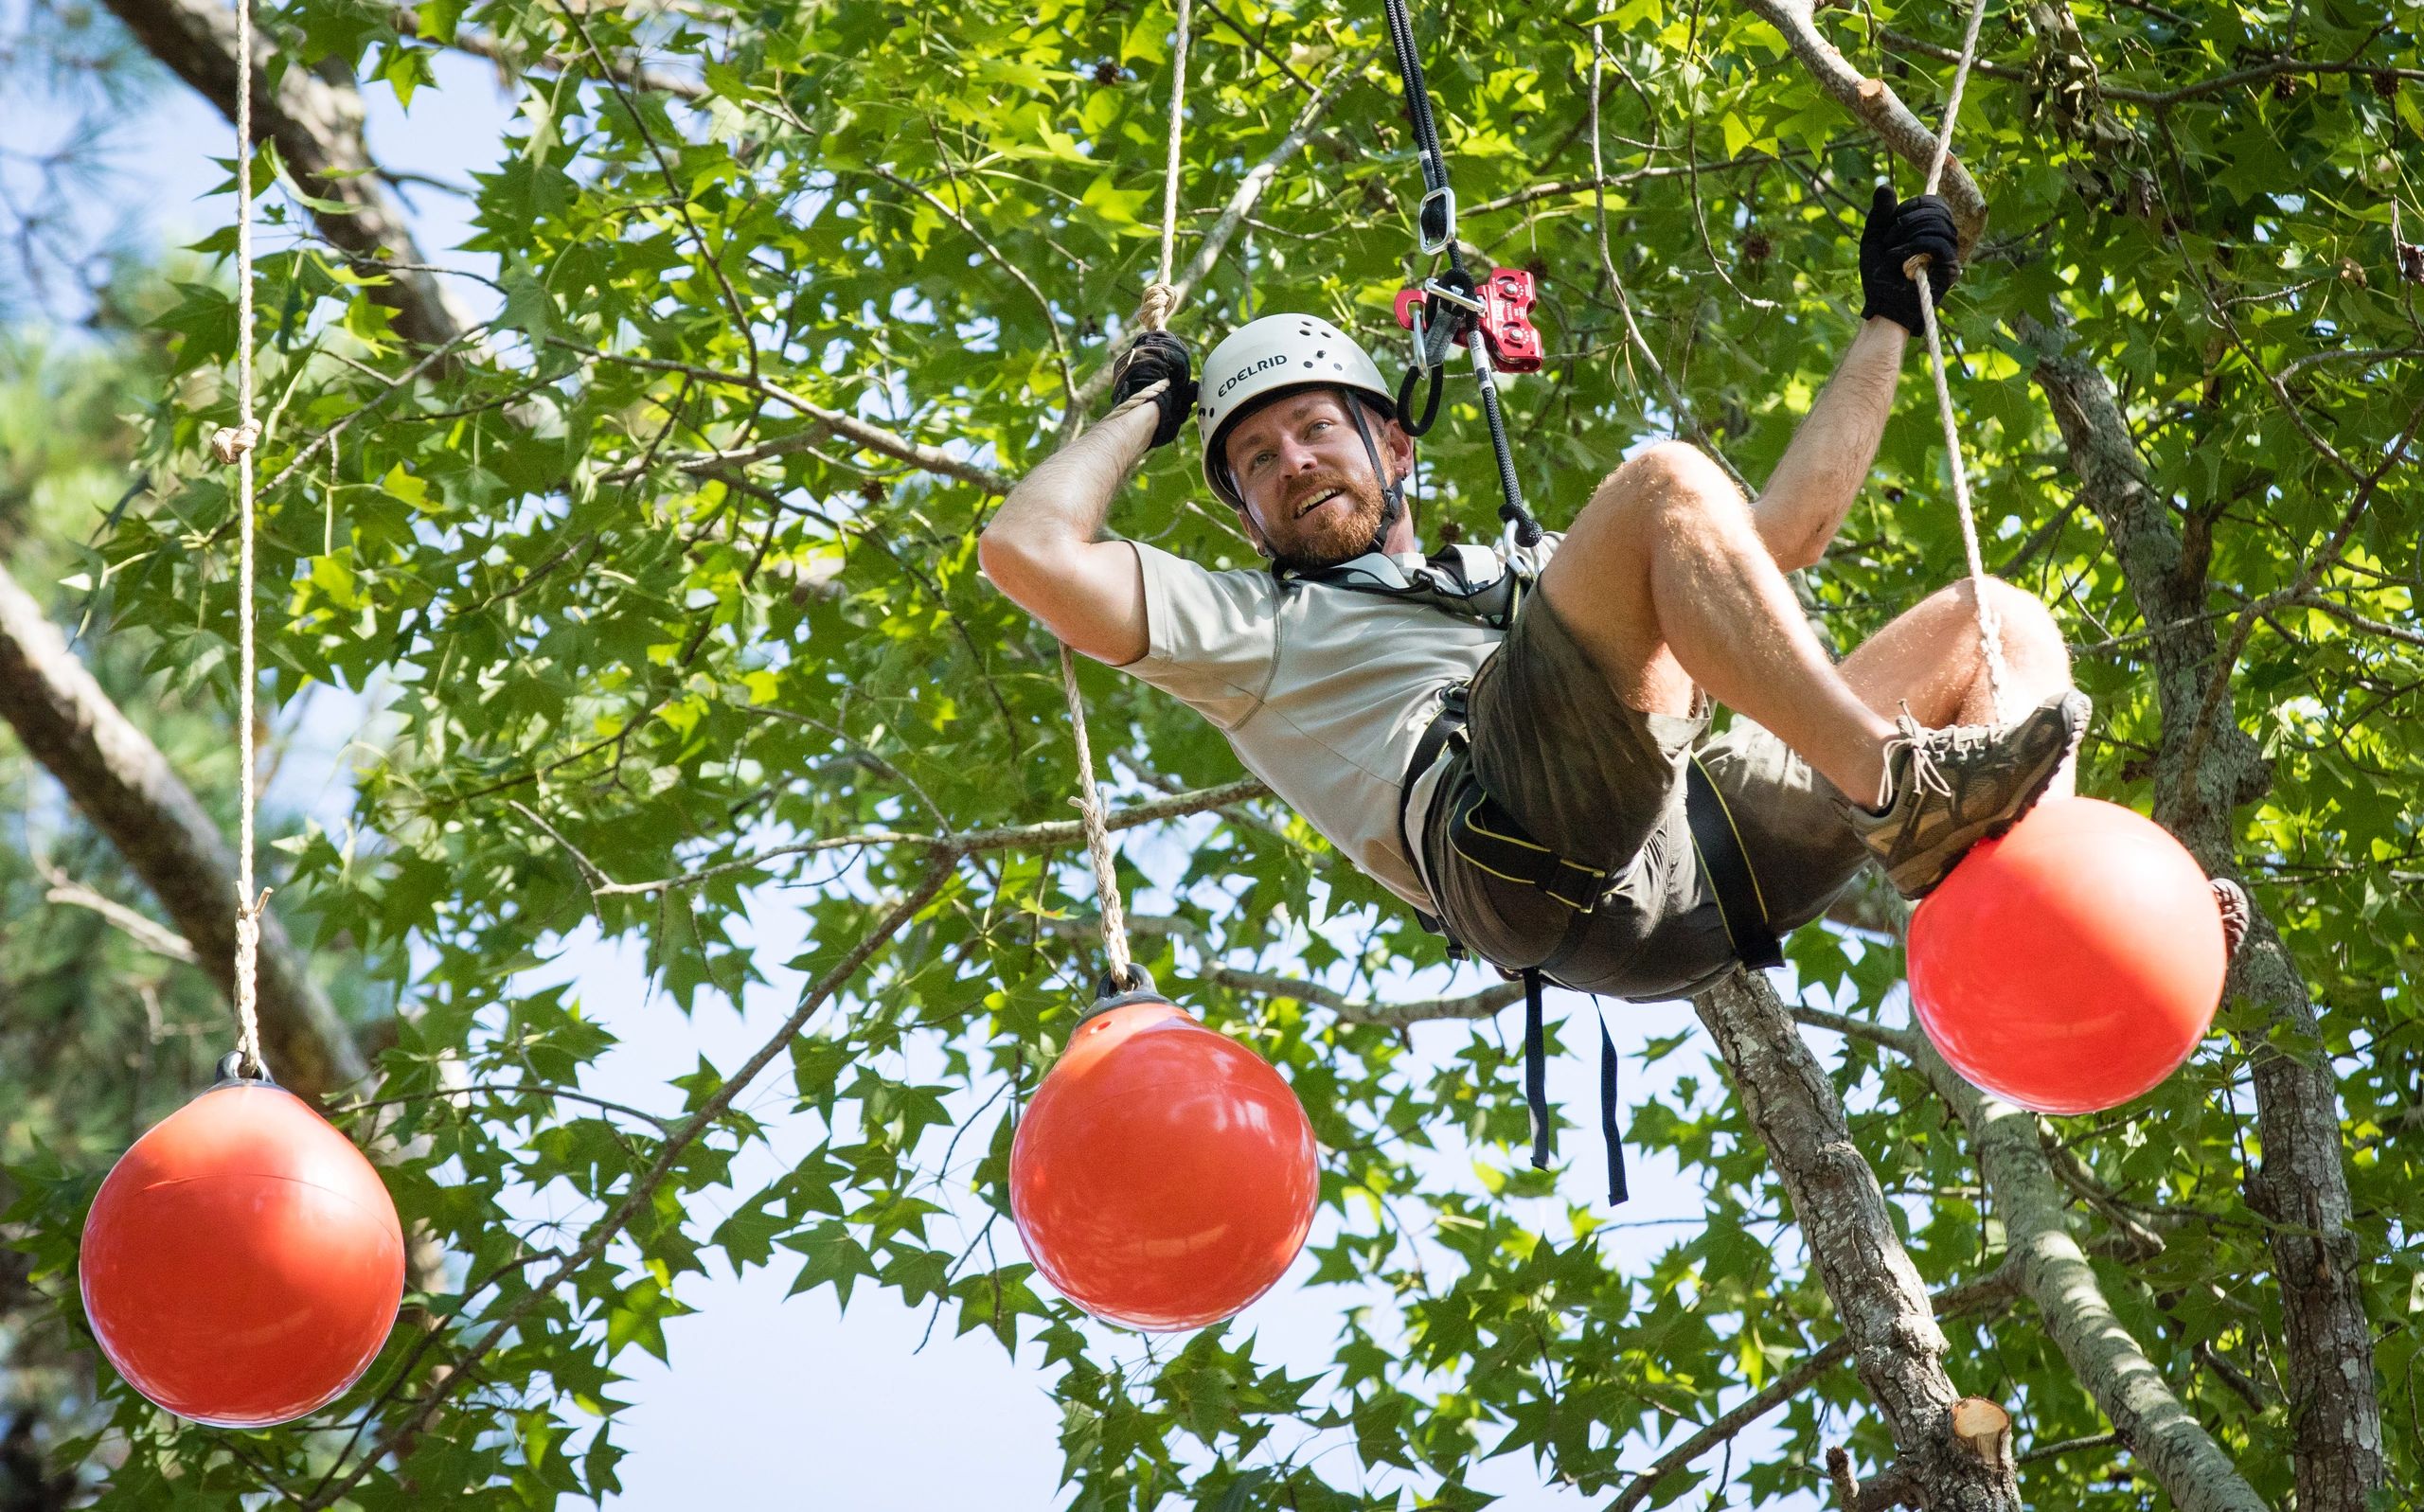 Man on challenge course activity on outdoor ropes course in Wisconsin.